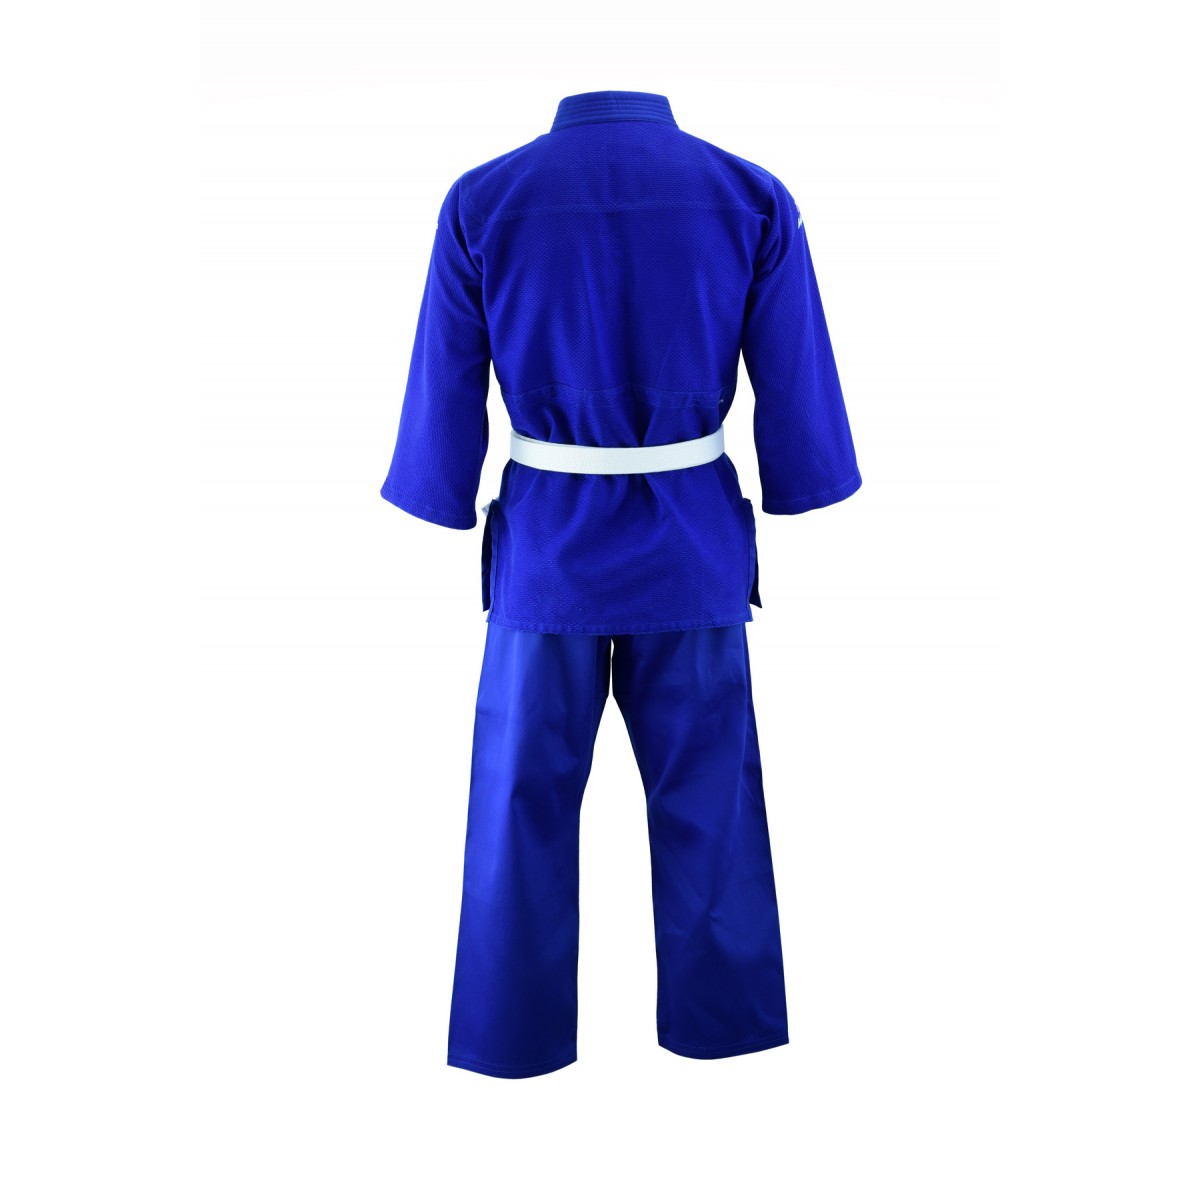 Blitz Adult Middleweight Judo Suit 450g 